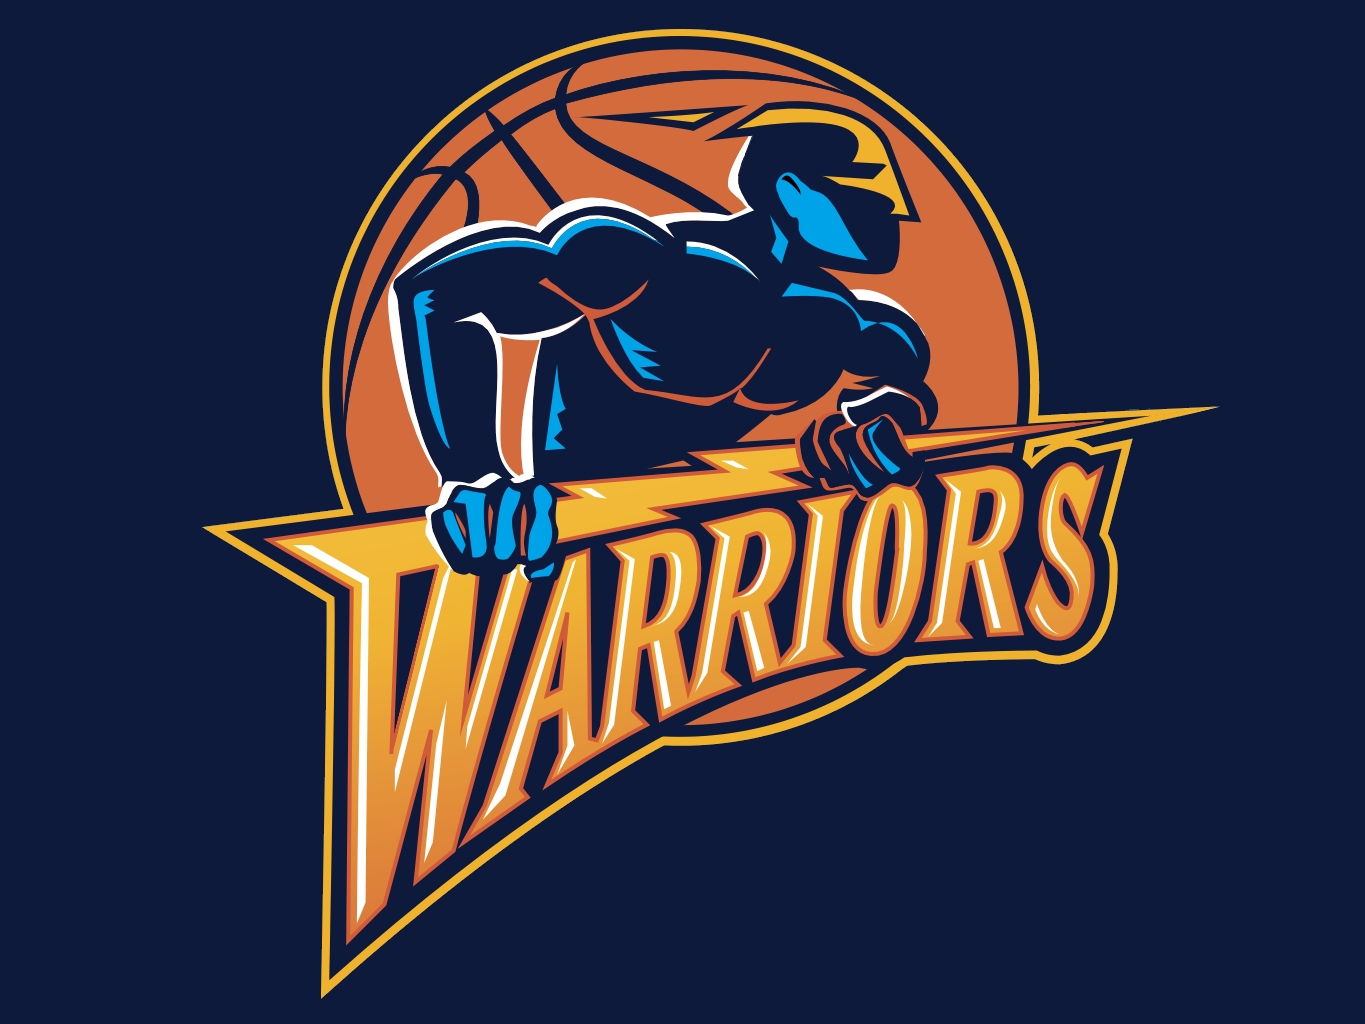 The Old Golden State Warriors Logo